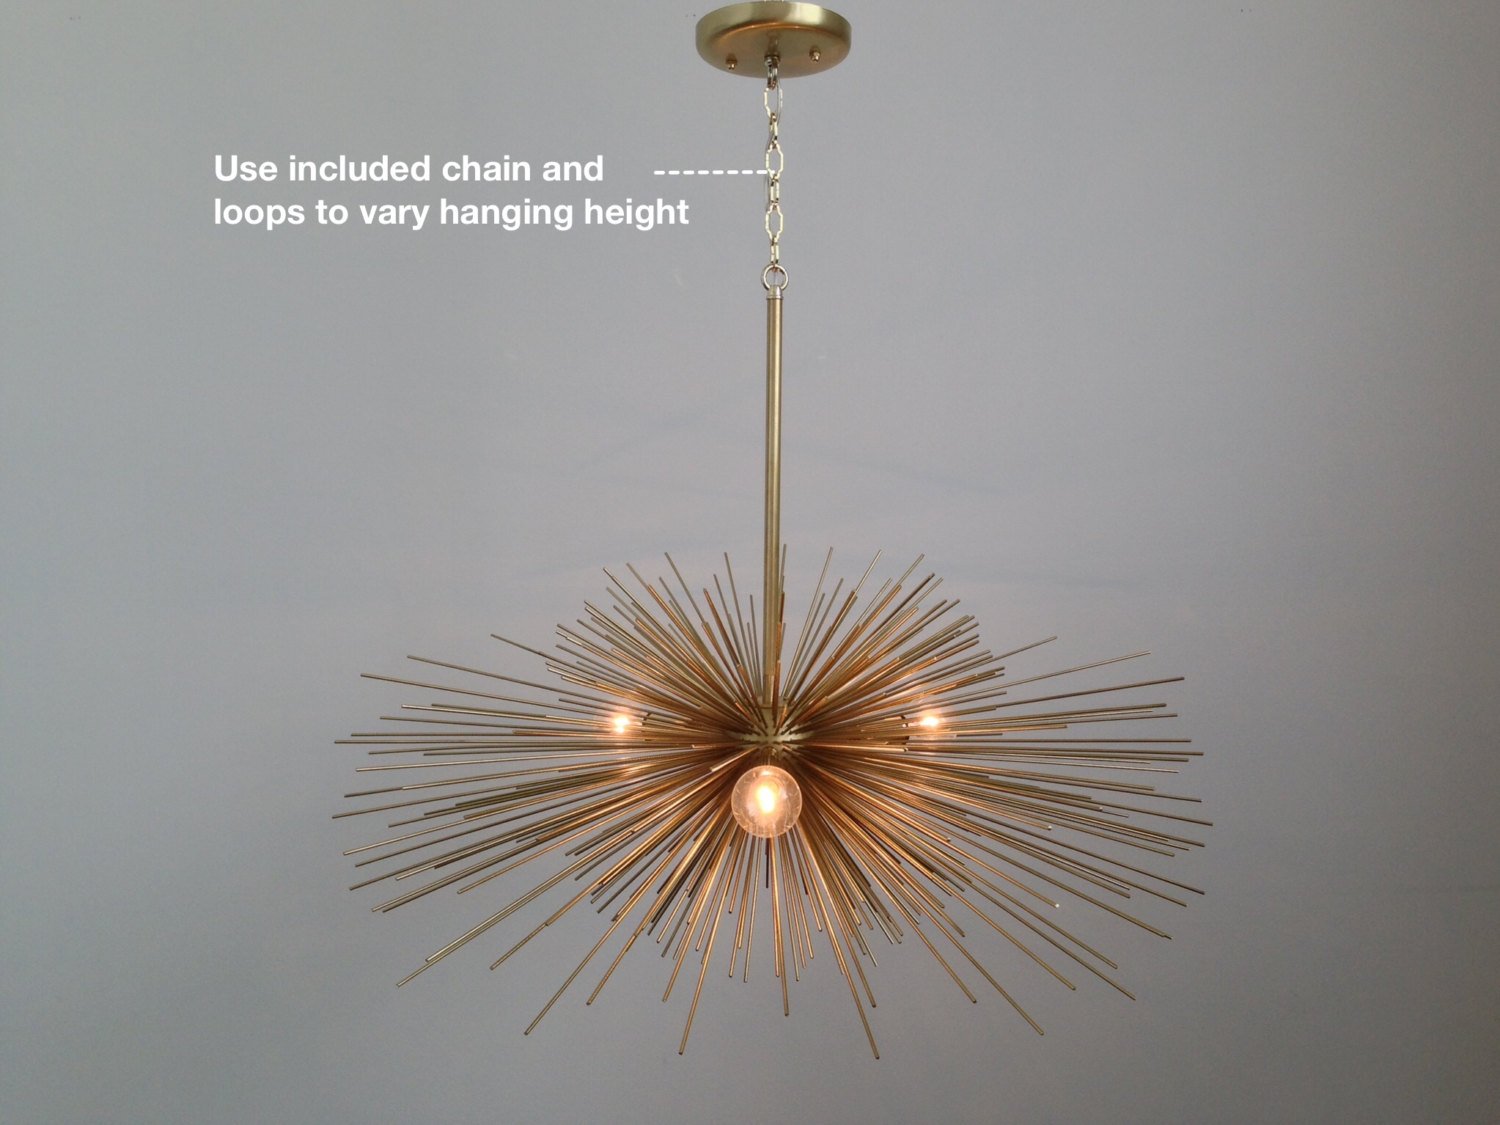 How to Hang a Chandelier: Chain, Rod, or Both